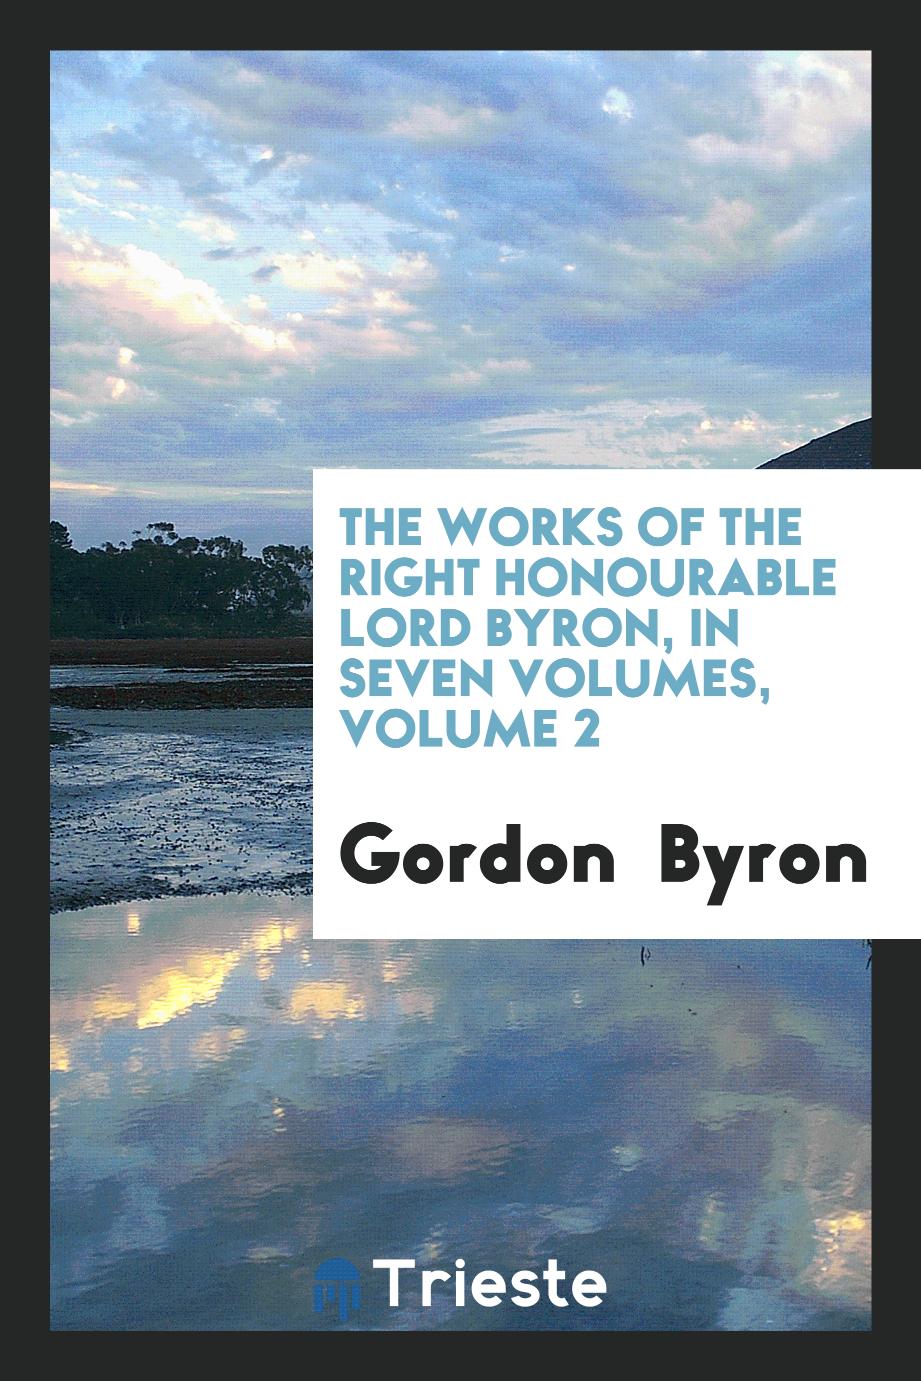 The Works of the Right Honourable Lord Byron, in Seven Volumes, Volume 2